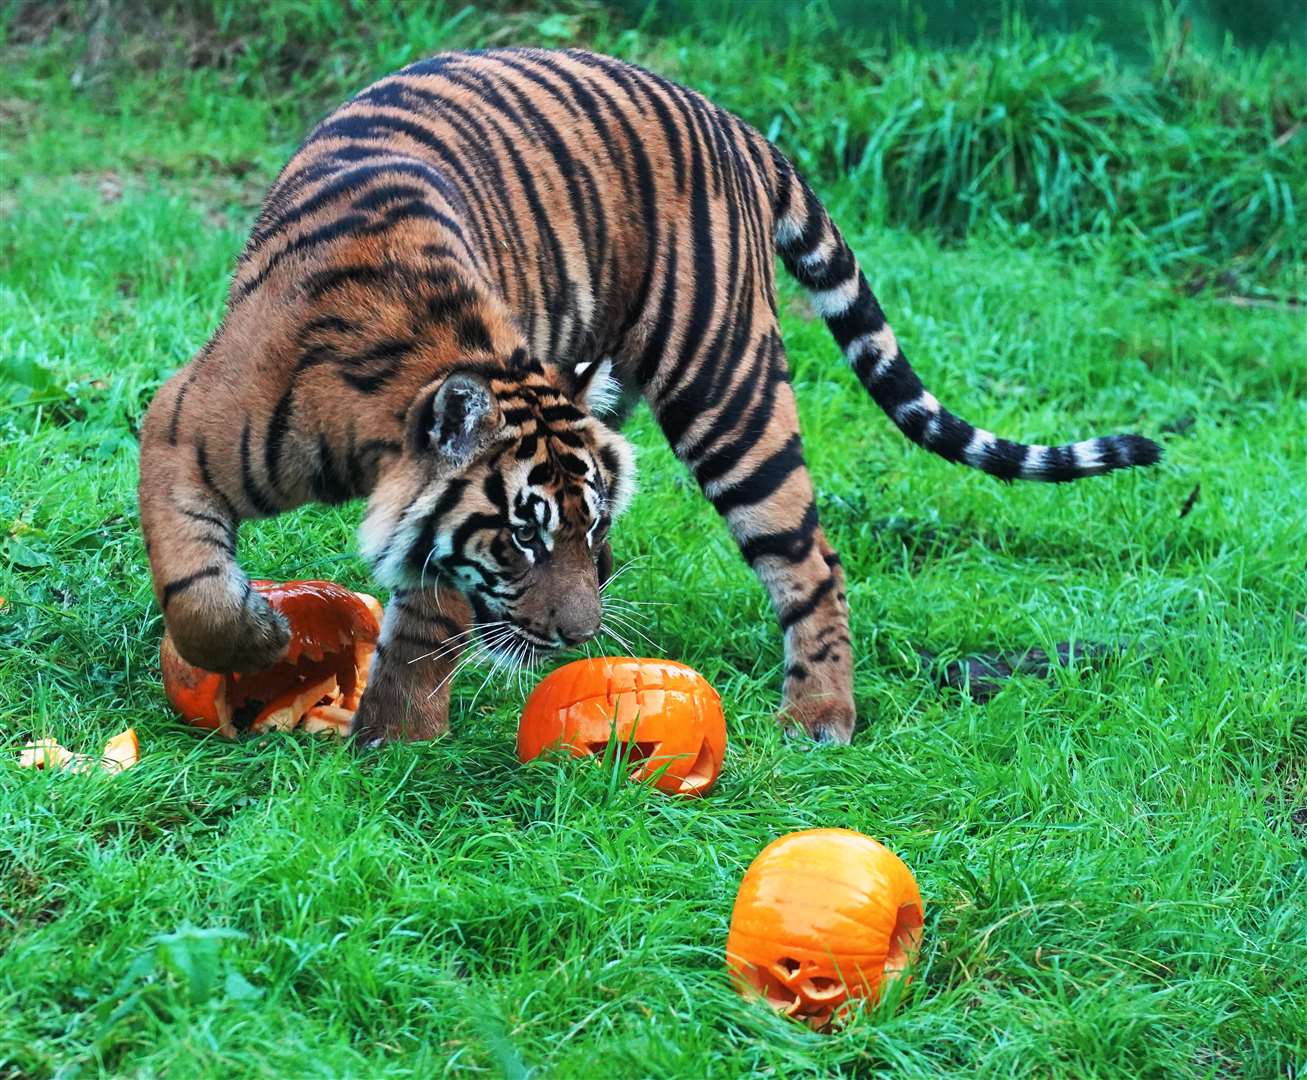 The tigers enjoyed playing with their food before devouring it (Jonathan Brady/PA)